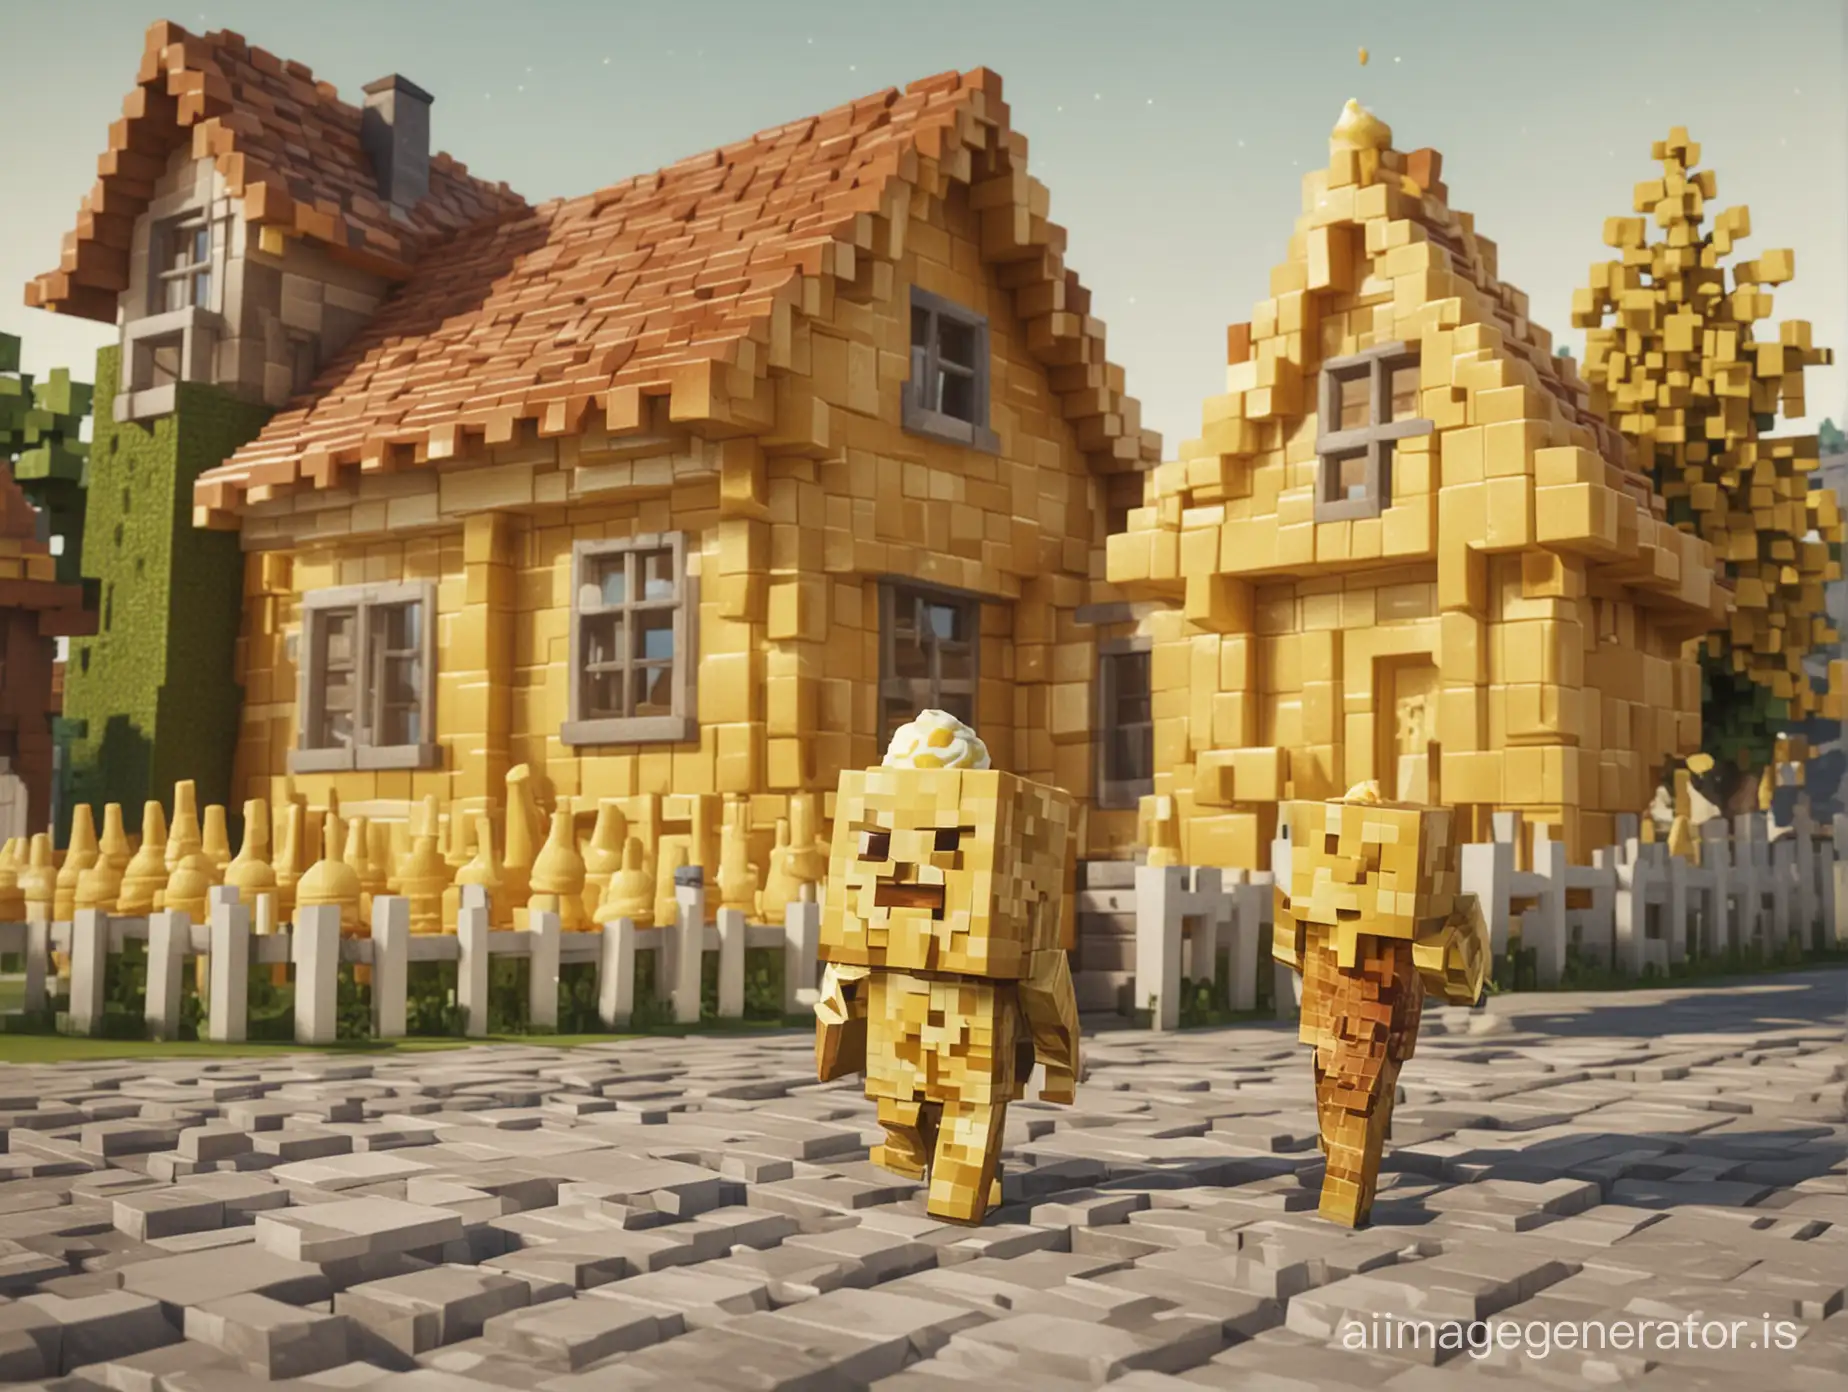 The little man from Minecraft next to the house made of golden ice cream